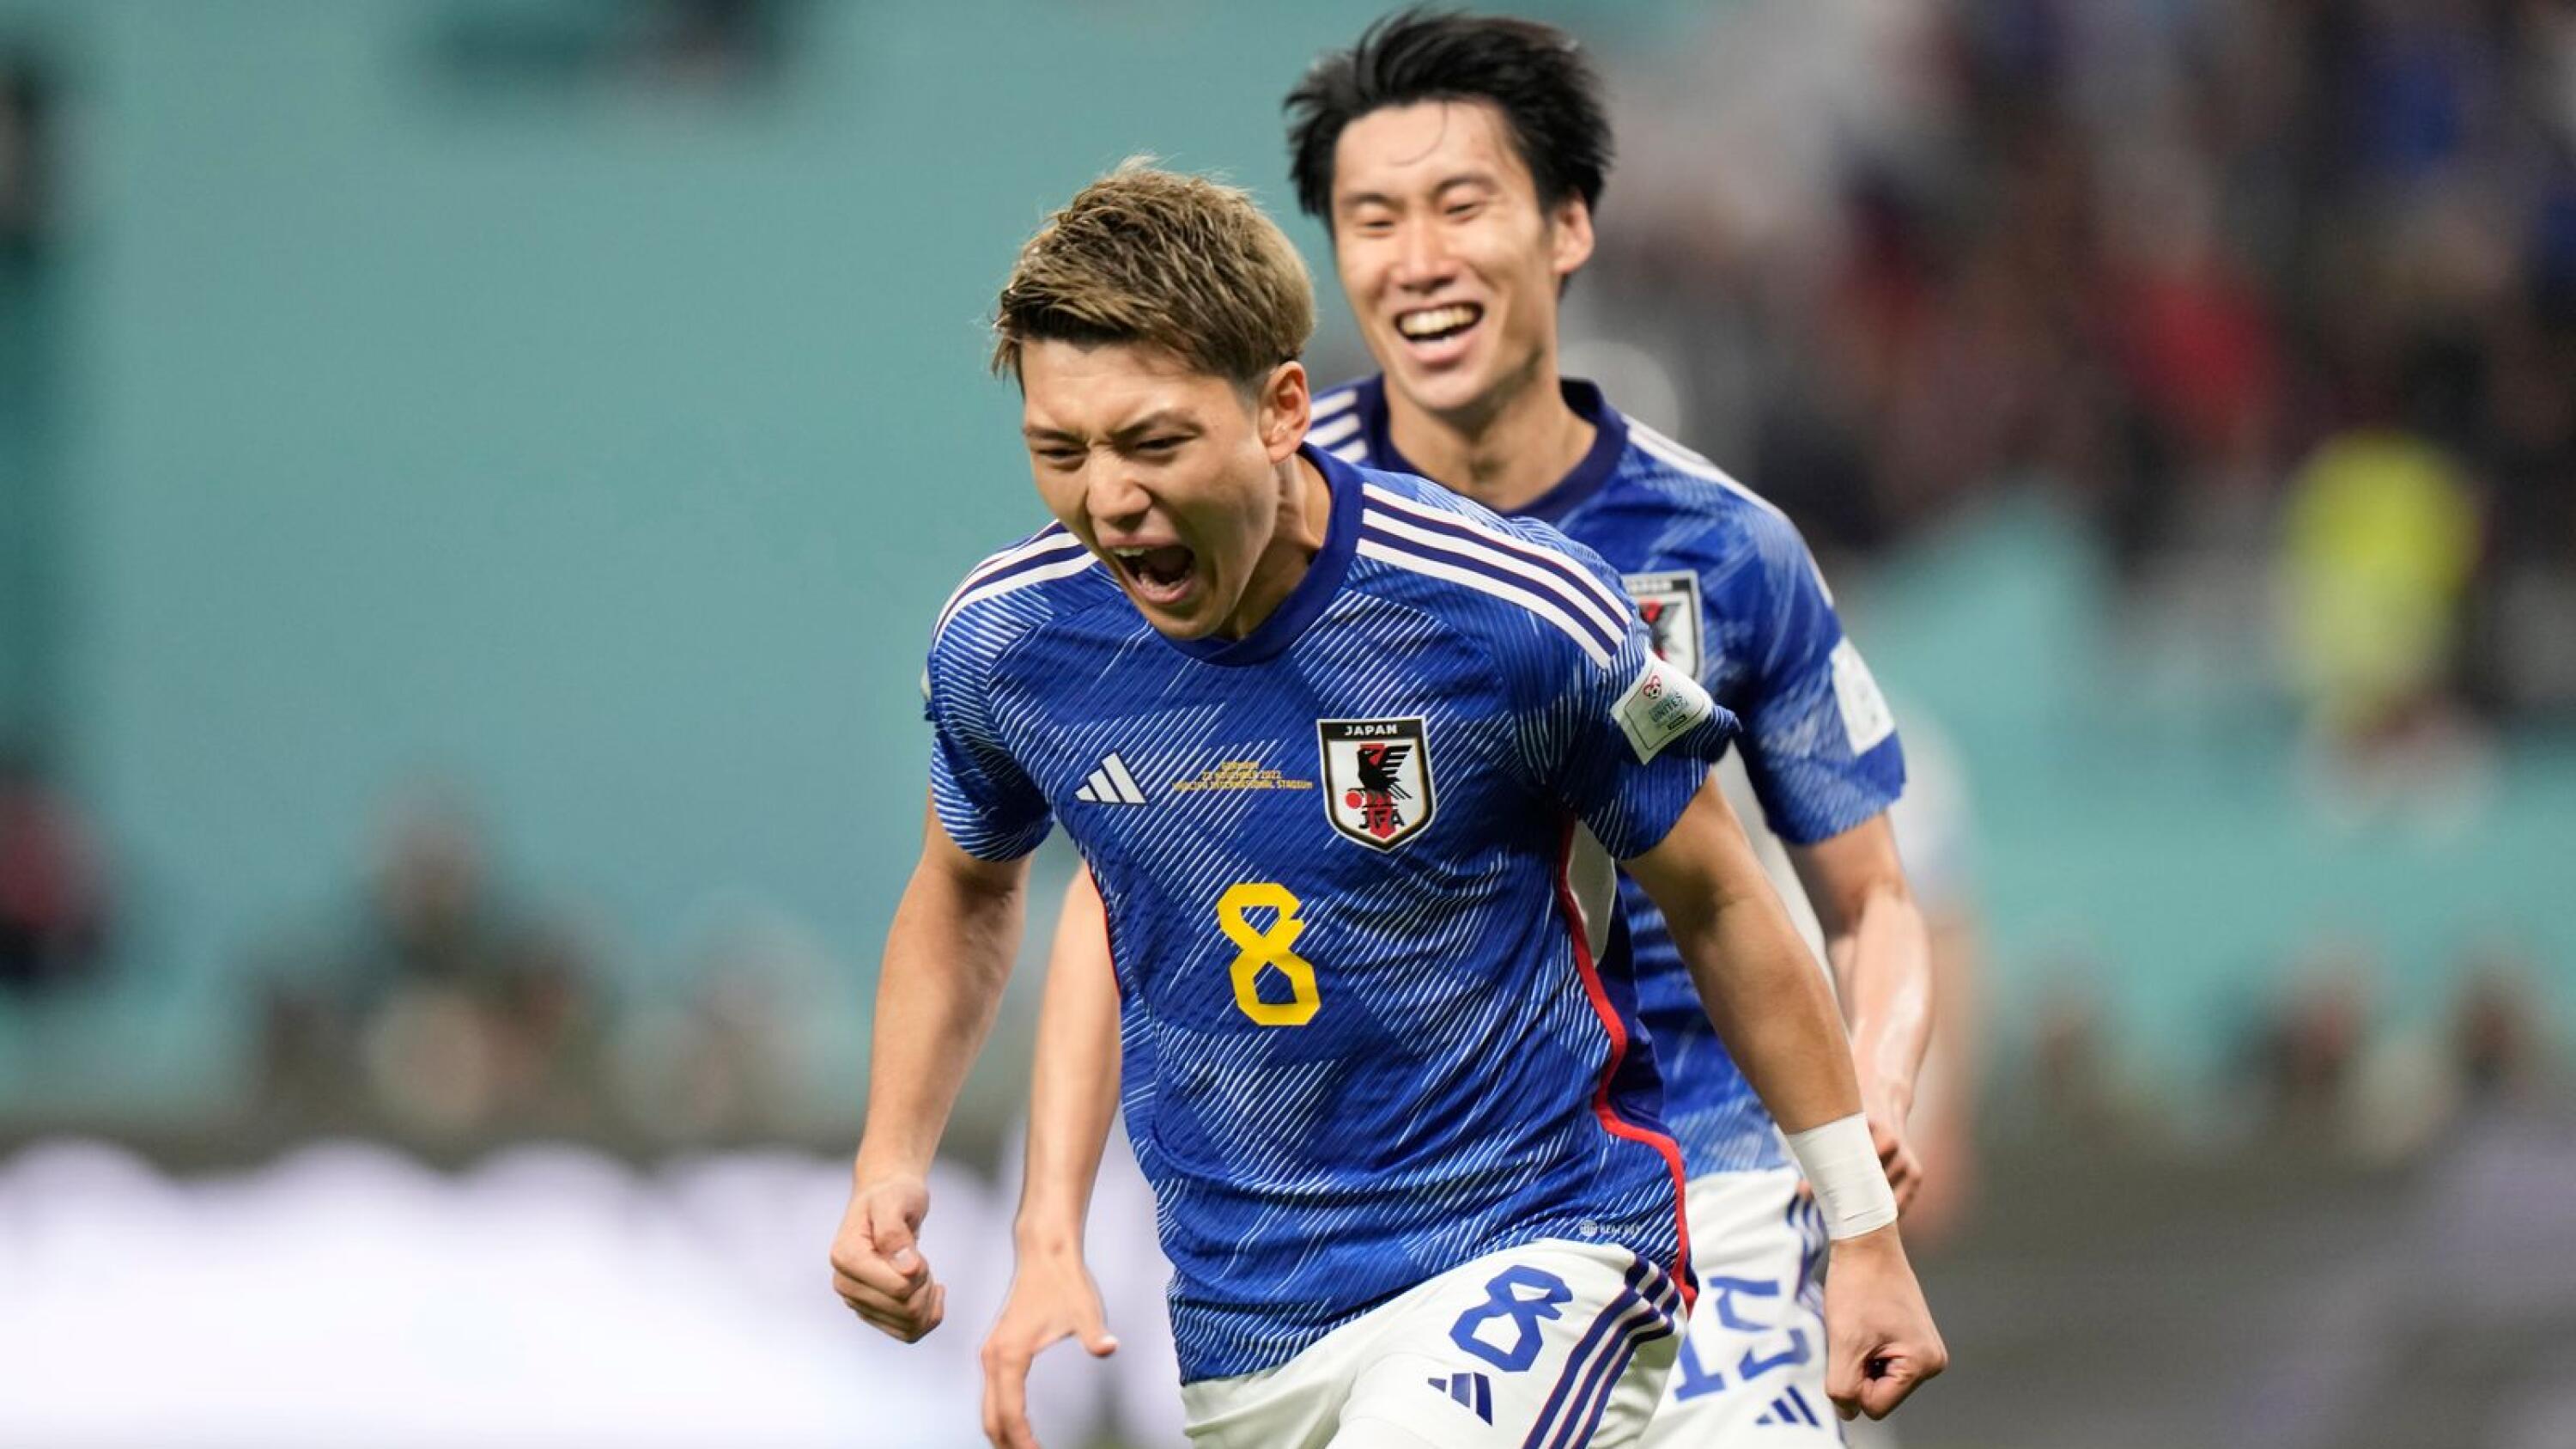 TOP JAPANESE FOOTBALL PLAYERS